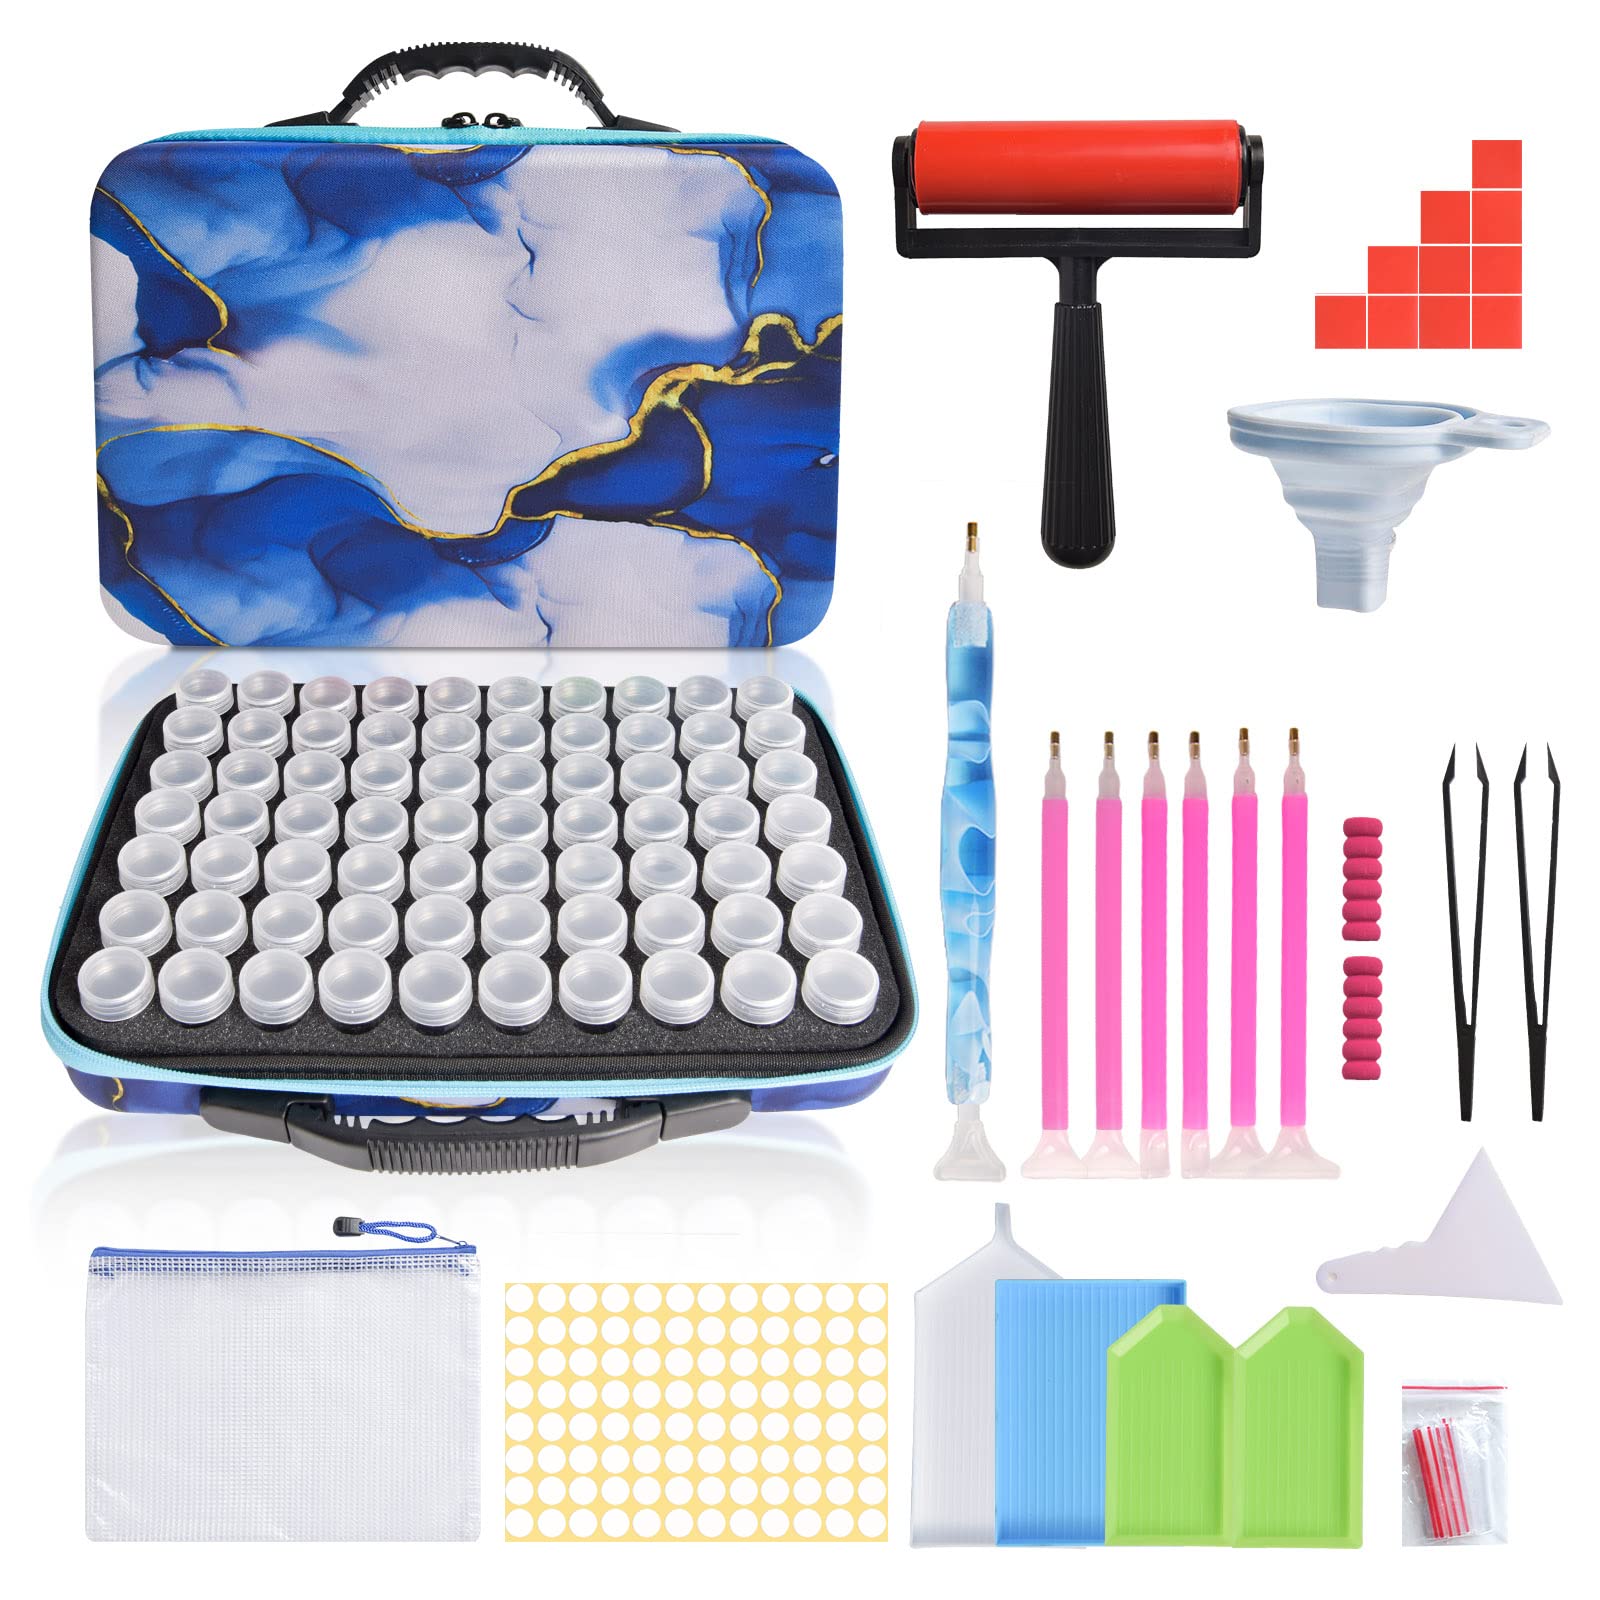 New 5D diamond painting accessories tools kit for diamond embroidery  accessories art supplies storage box